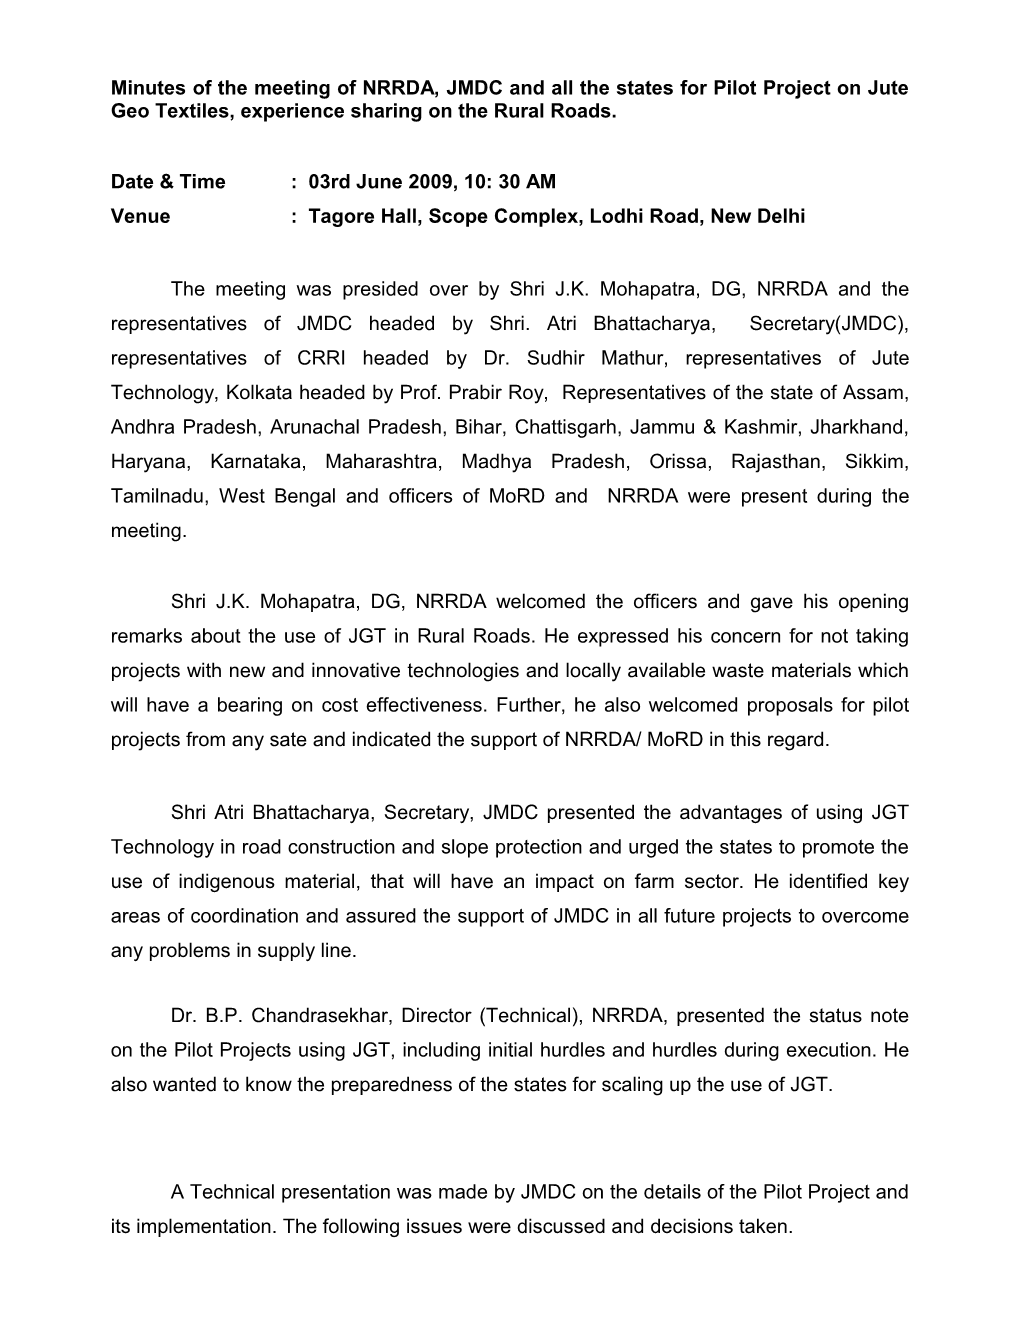 Minutes of the Meeting of NRRDA, JMDC and All the States for Pilot Project on Jute Geo